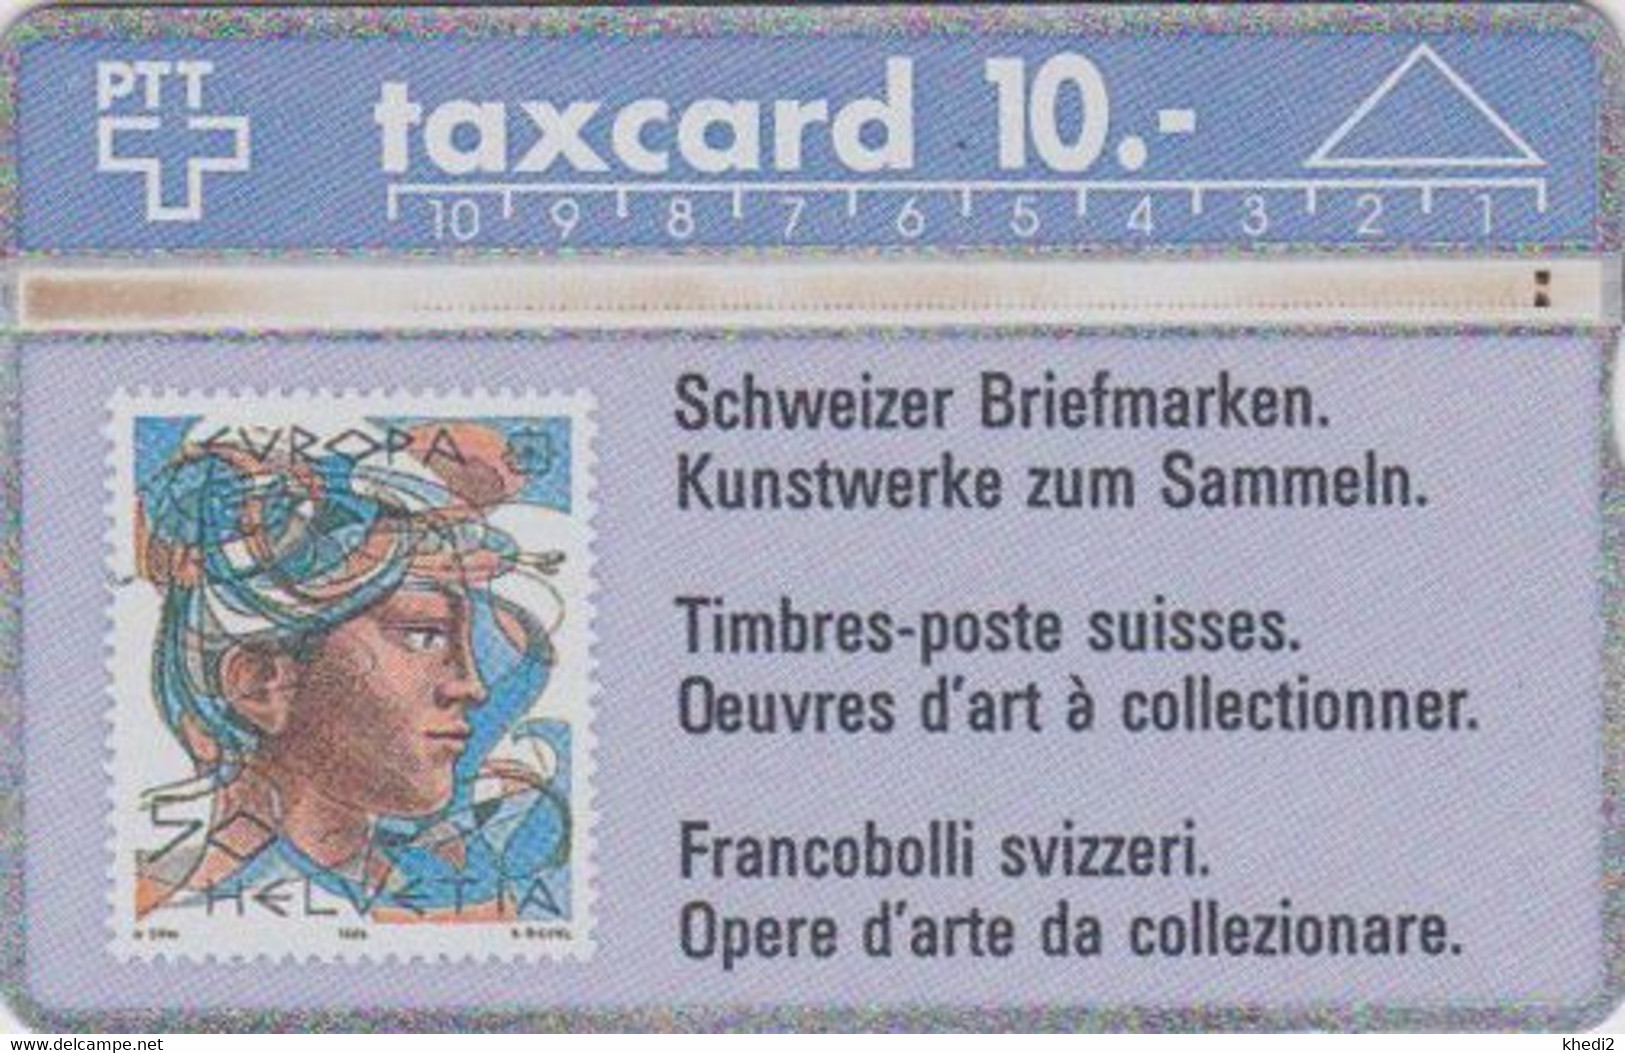 TC Magnétique L&G SUISSE - TIMBRE EUOPA PEINTURE Femme - STAMP With Woman On Phonecard SWITZERLAND - Card - 190 - Timbres & Monnaies